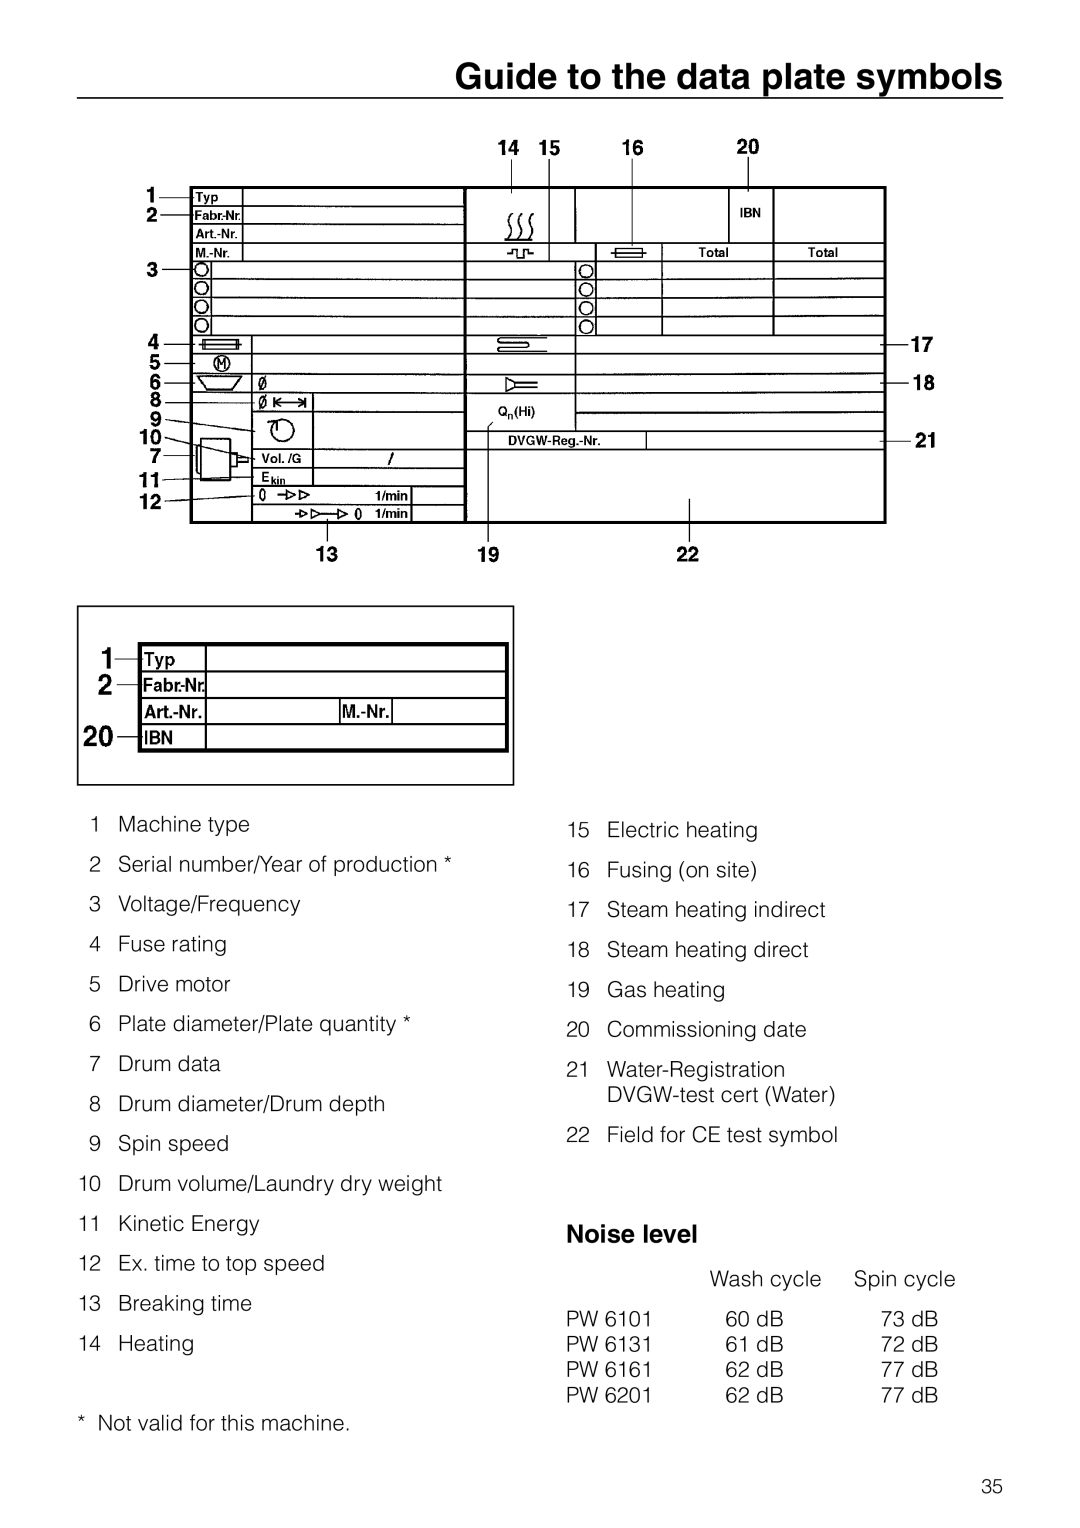 Miele PW 6201, PW 6161, PW 6101, PW 6131 operating instructions Guide to the data plate symbols, Noise level 